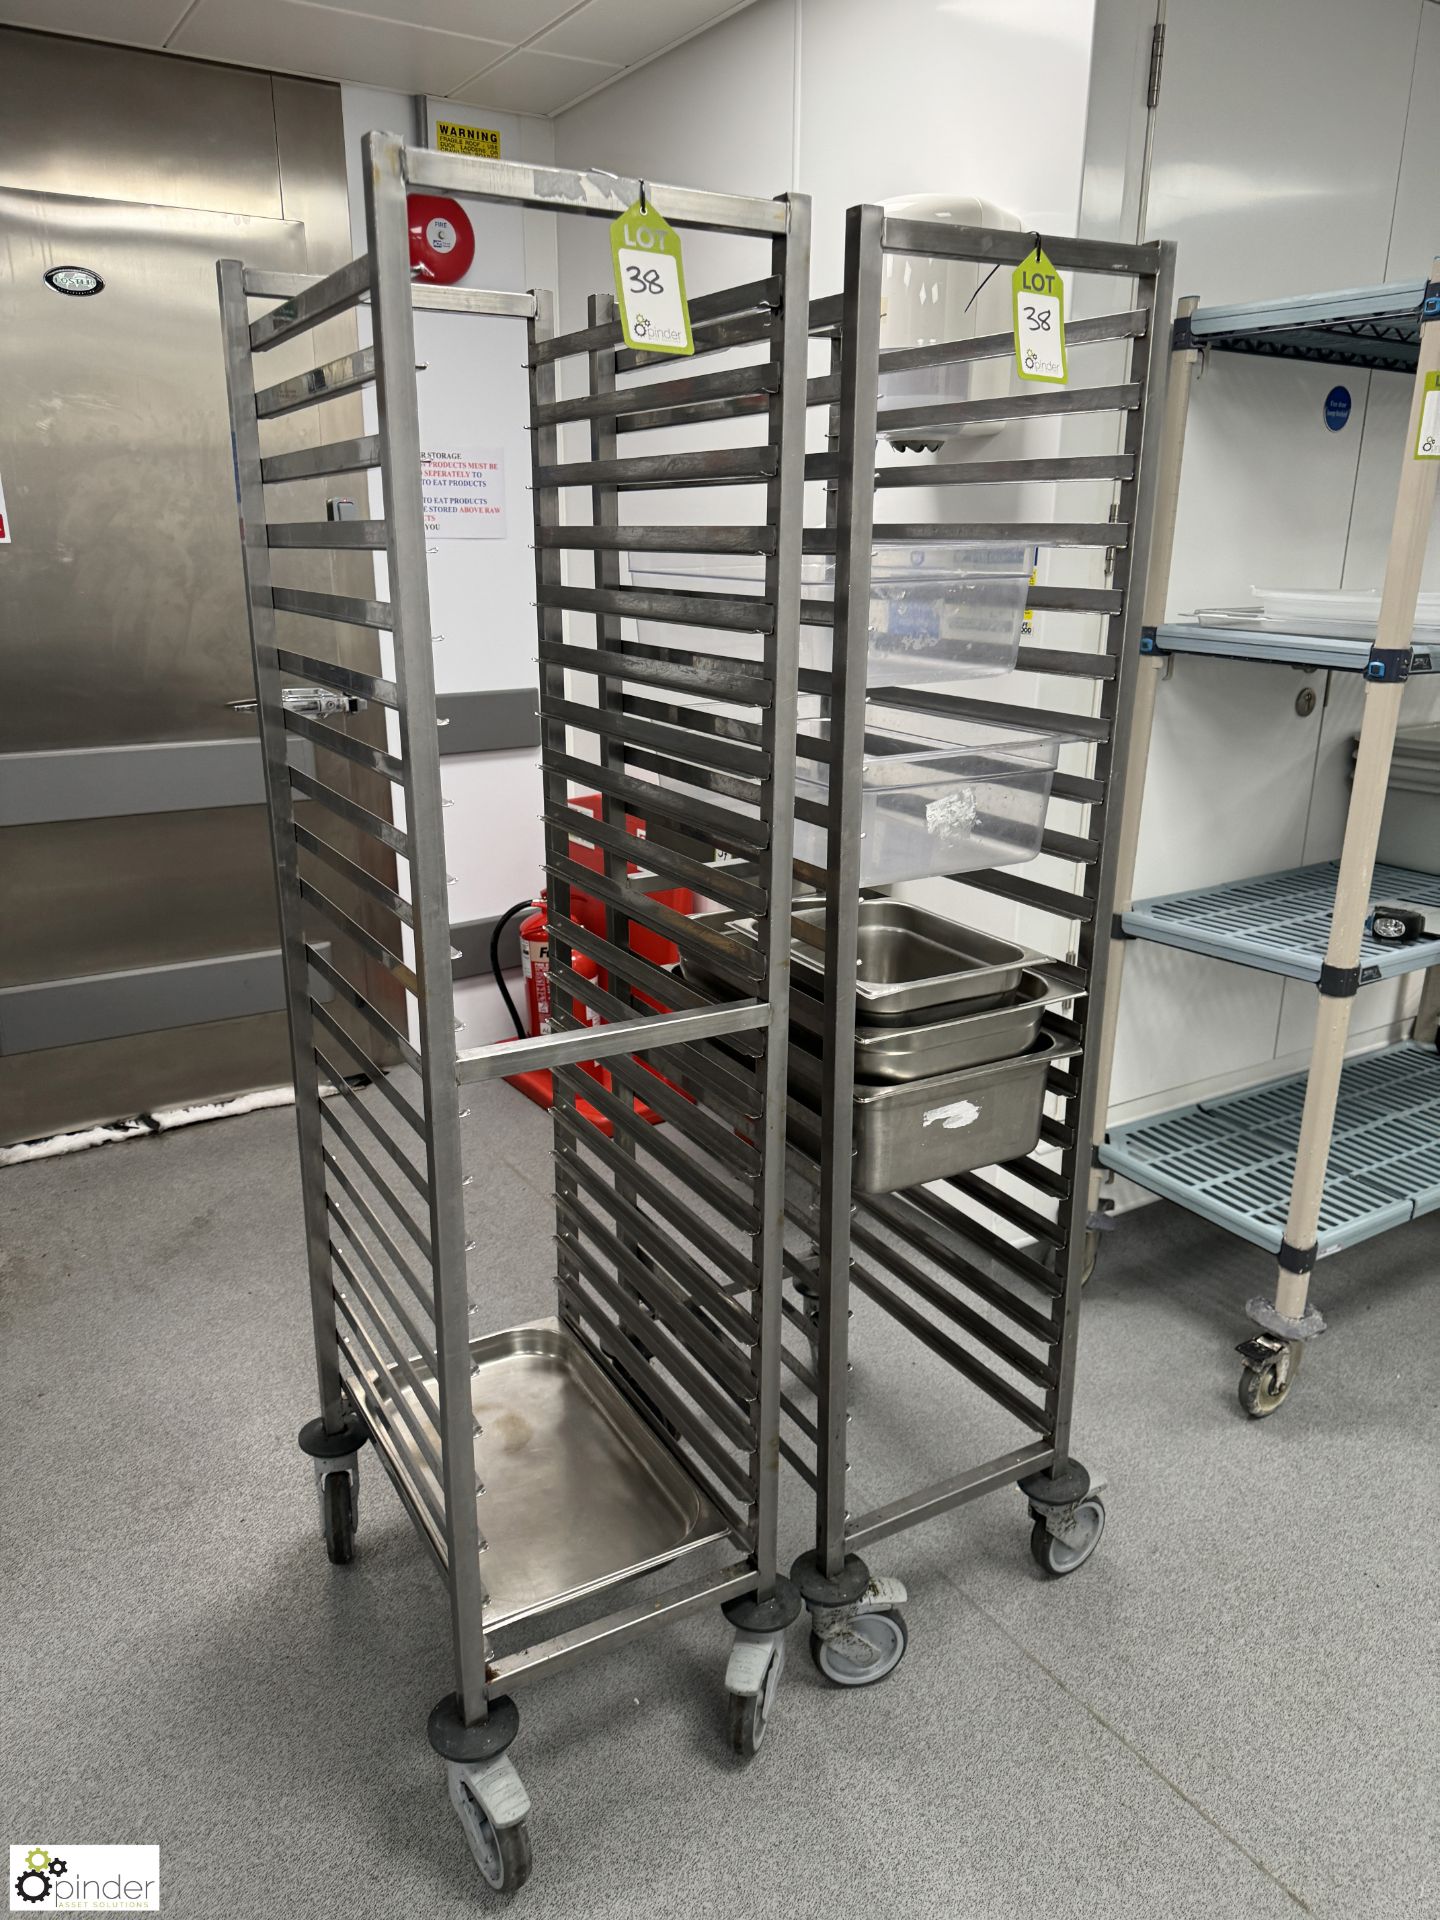 2 stainless steel multi tray Trolleys (location in building – basement kitchen 2)